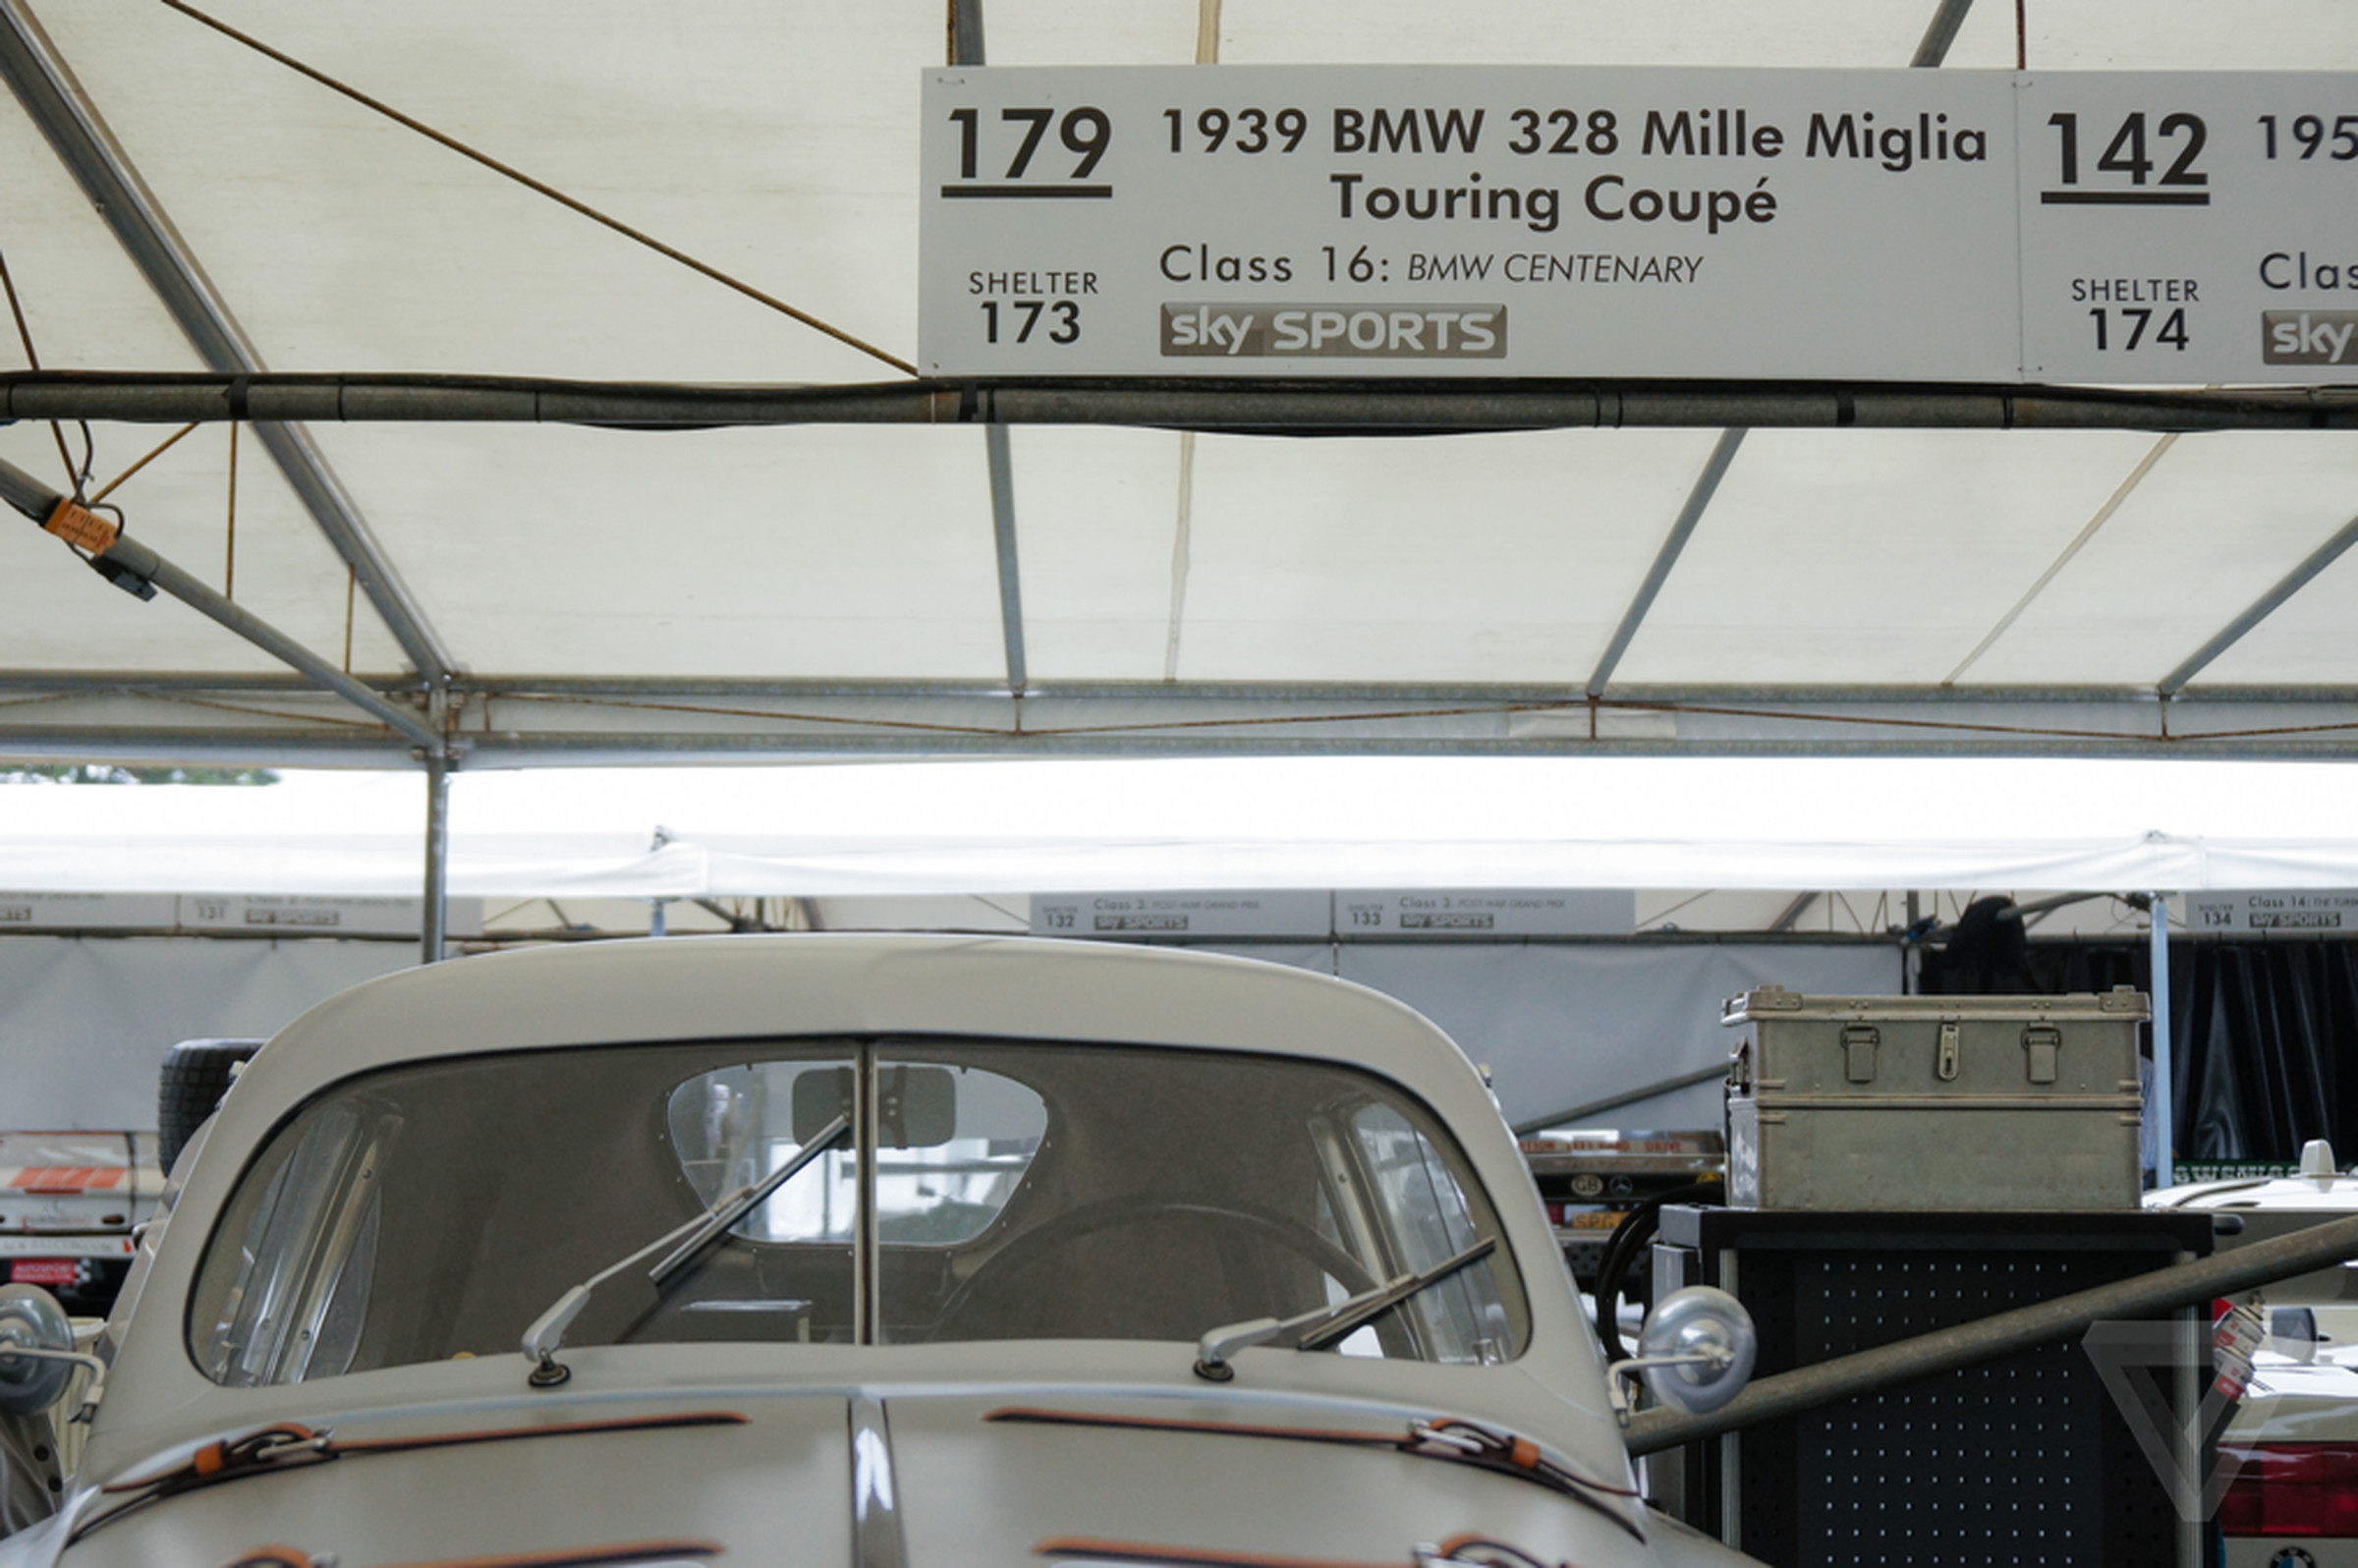 BMW 328 Mille Miglia Touring Coupé at Goodwood Festival of Speed